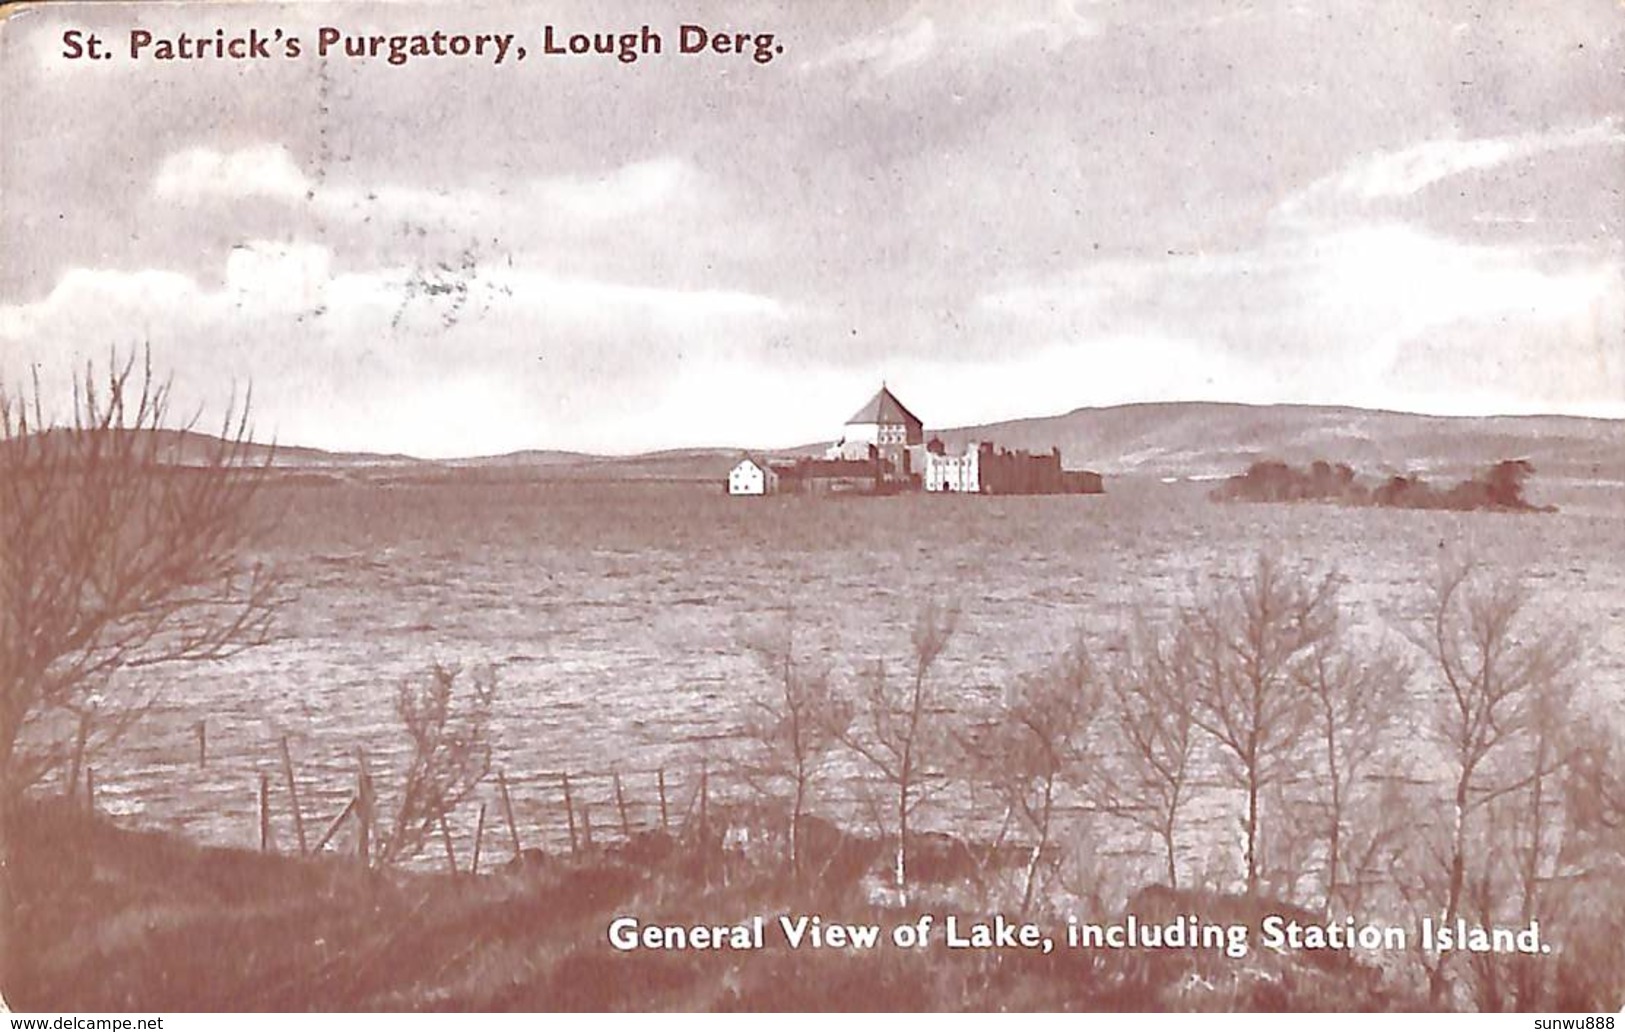 St Patrick's Purgatory, Lough Derg - General View Of Lake, Including Station Island (1952) - Donegal